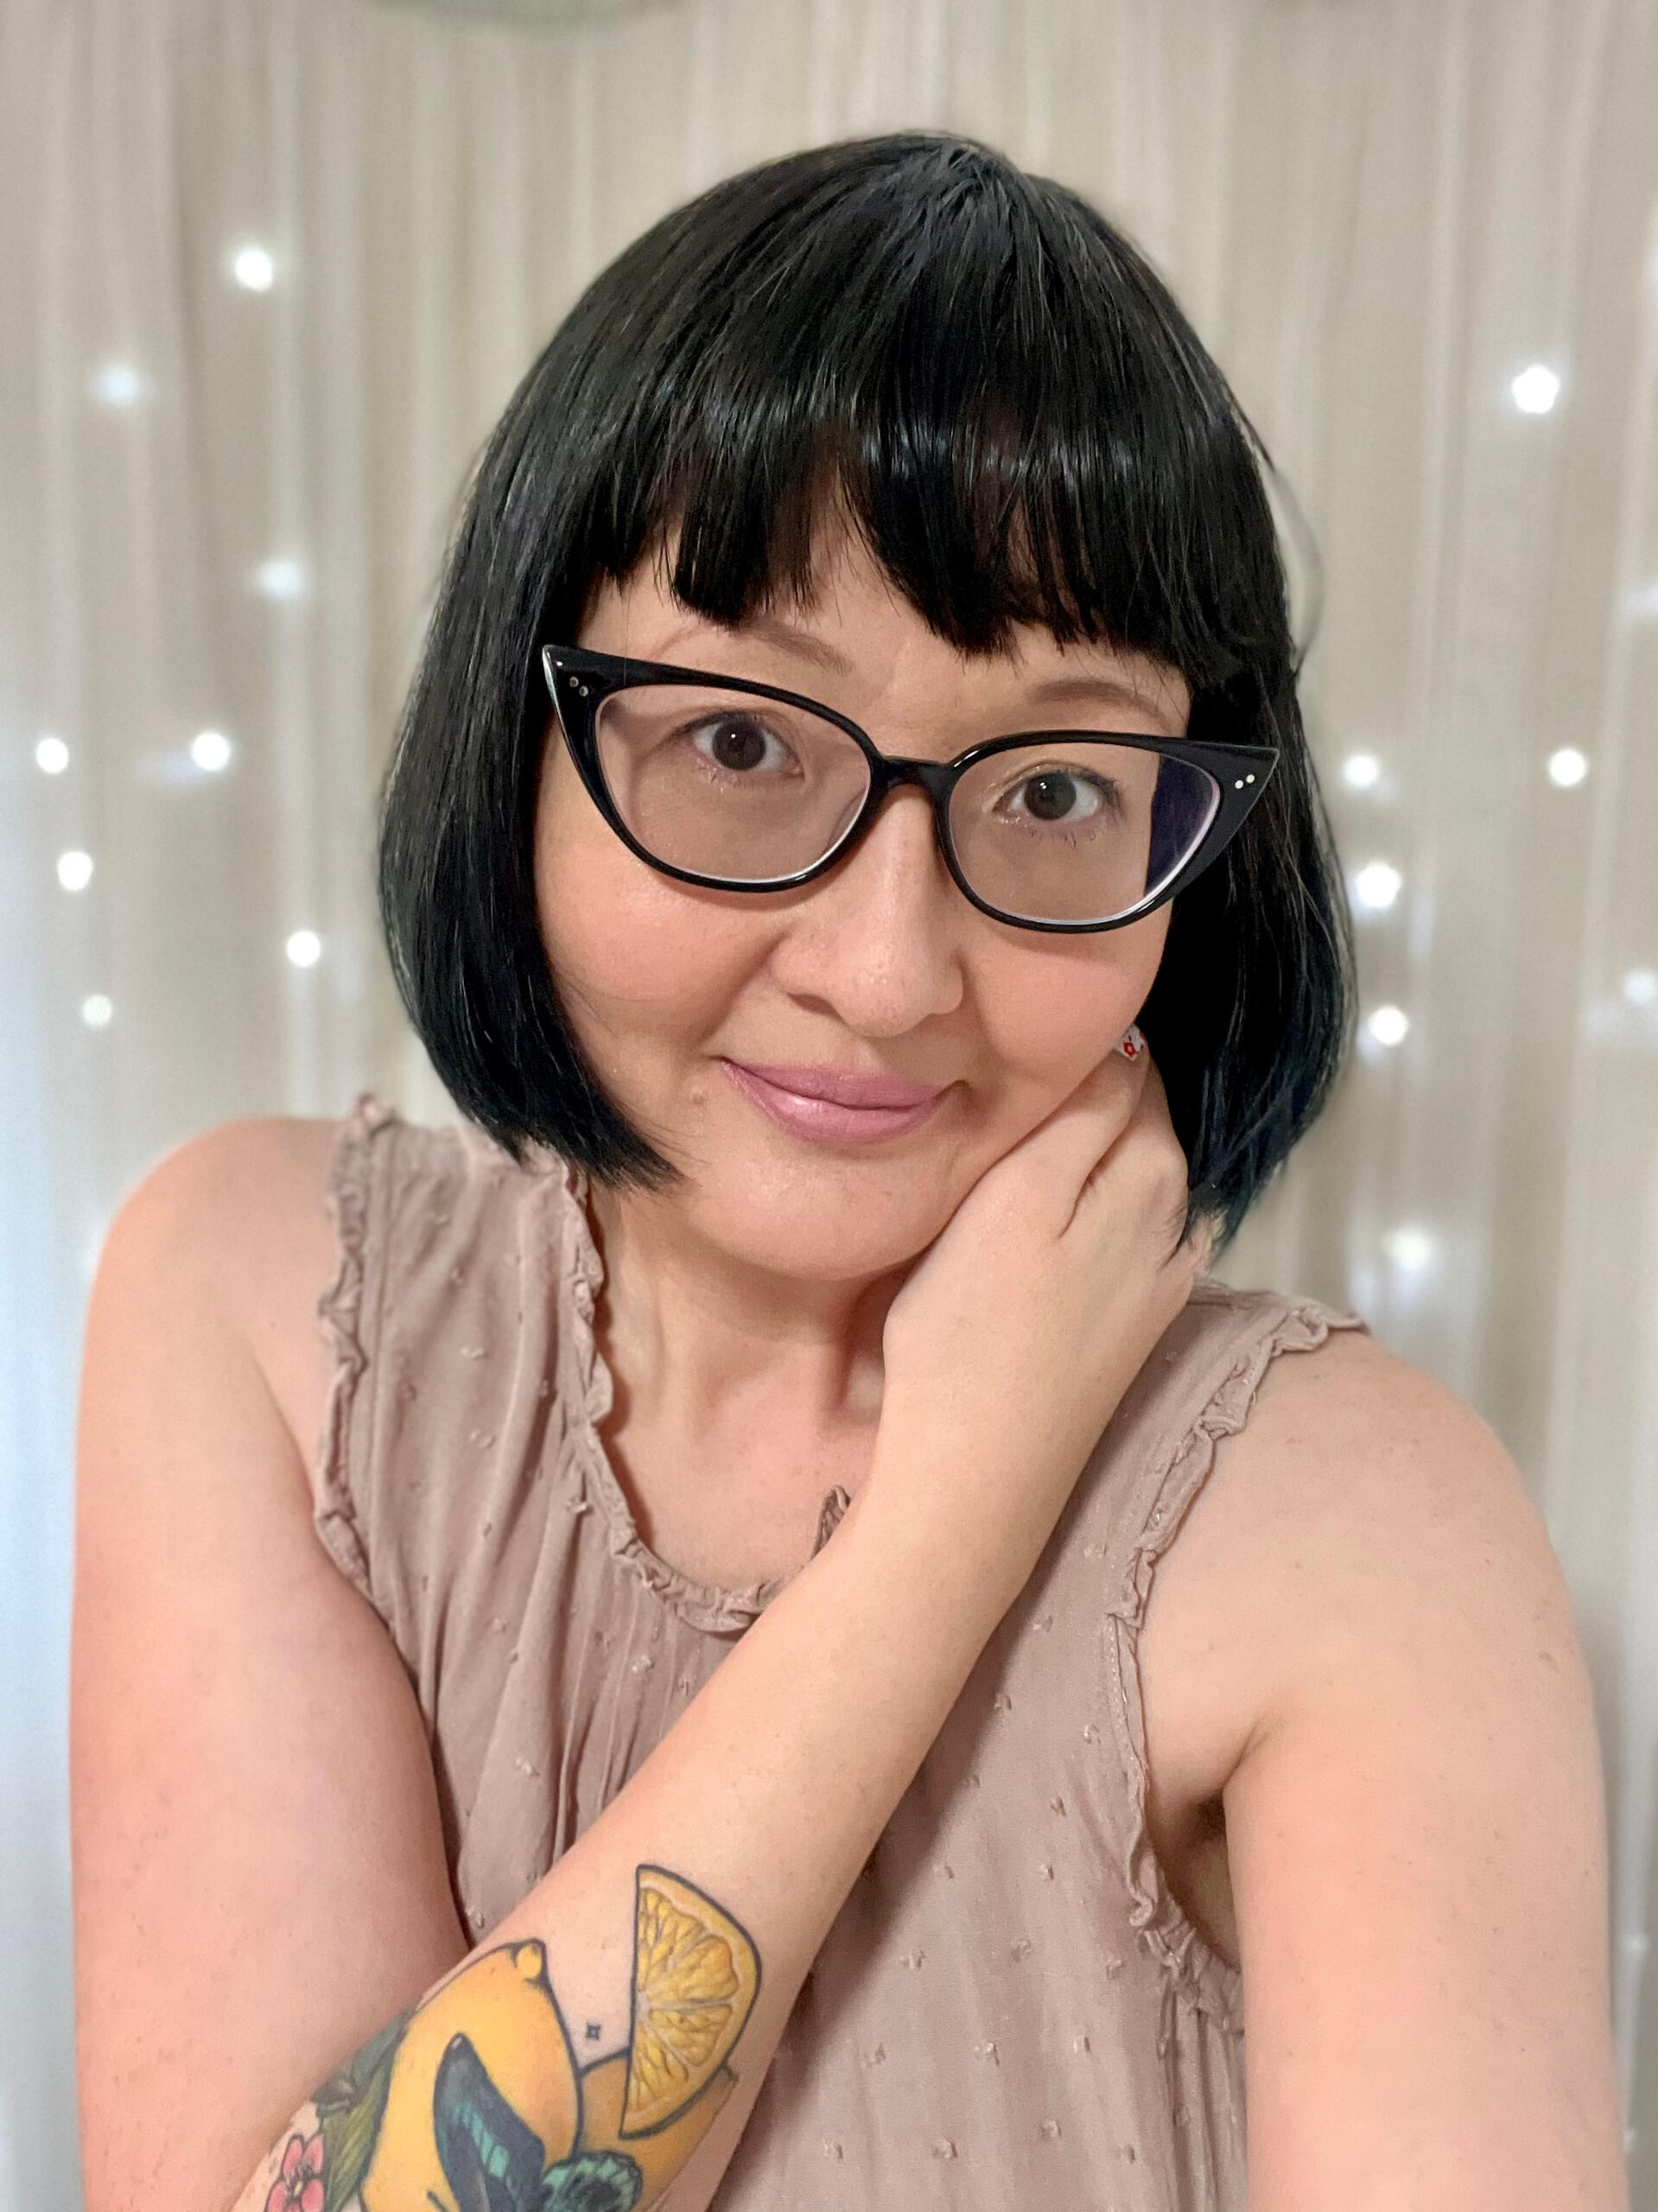 An image of me, Kat Kruger, with short black hair and bangs. I have black-rimmed cats eye glasses and am wearing a beige sleeveless top.